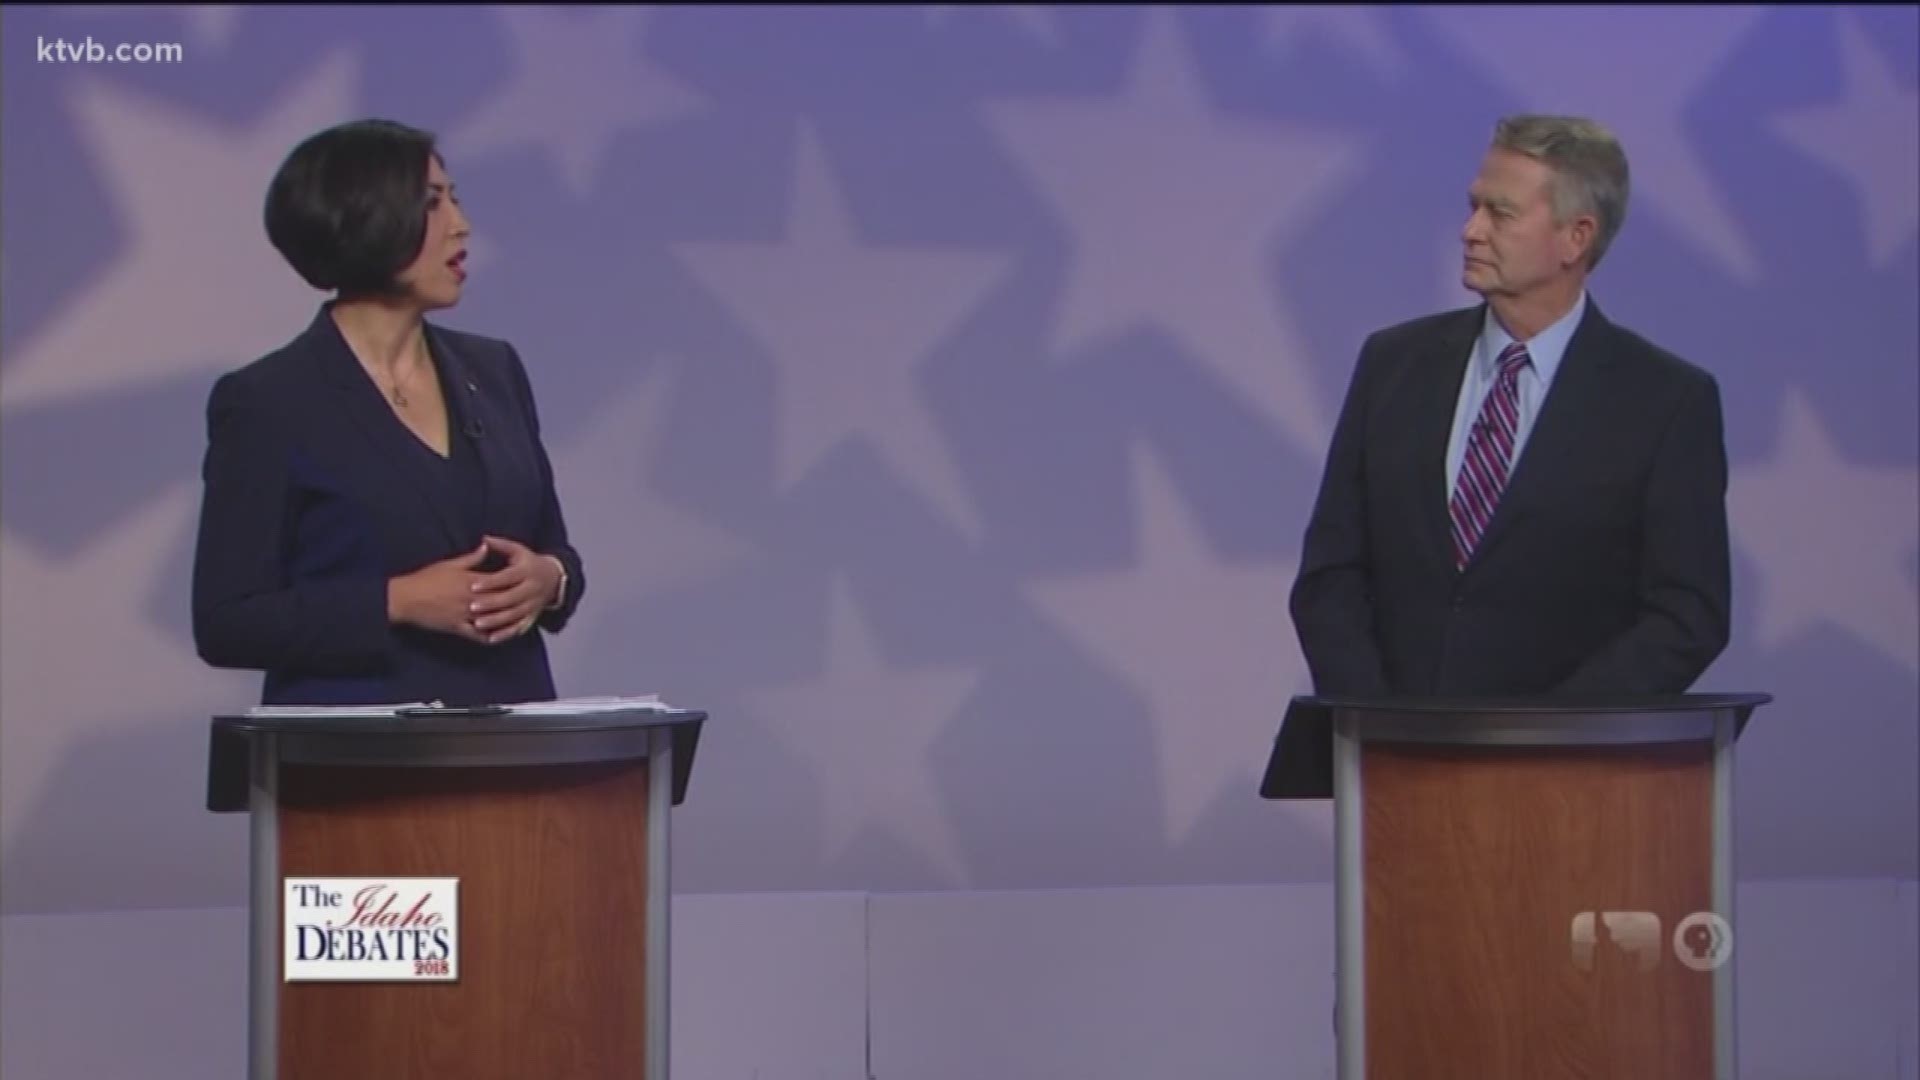 We are verifying claims made in Monday night's debate between Paulette Jordan and Brad Little.